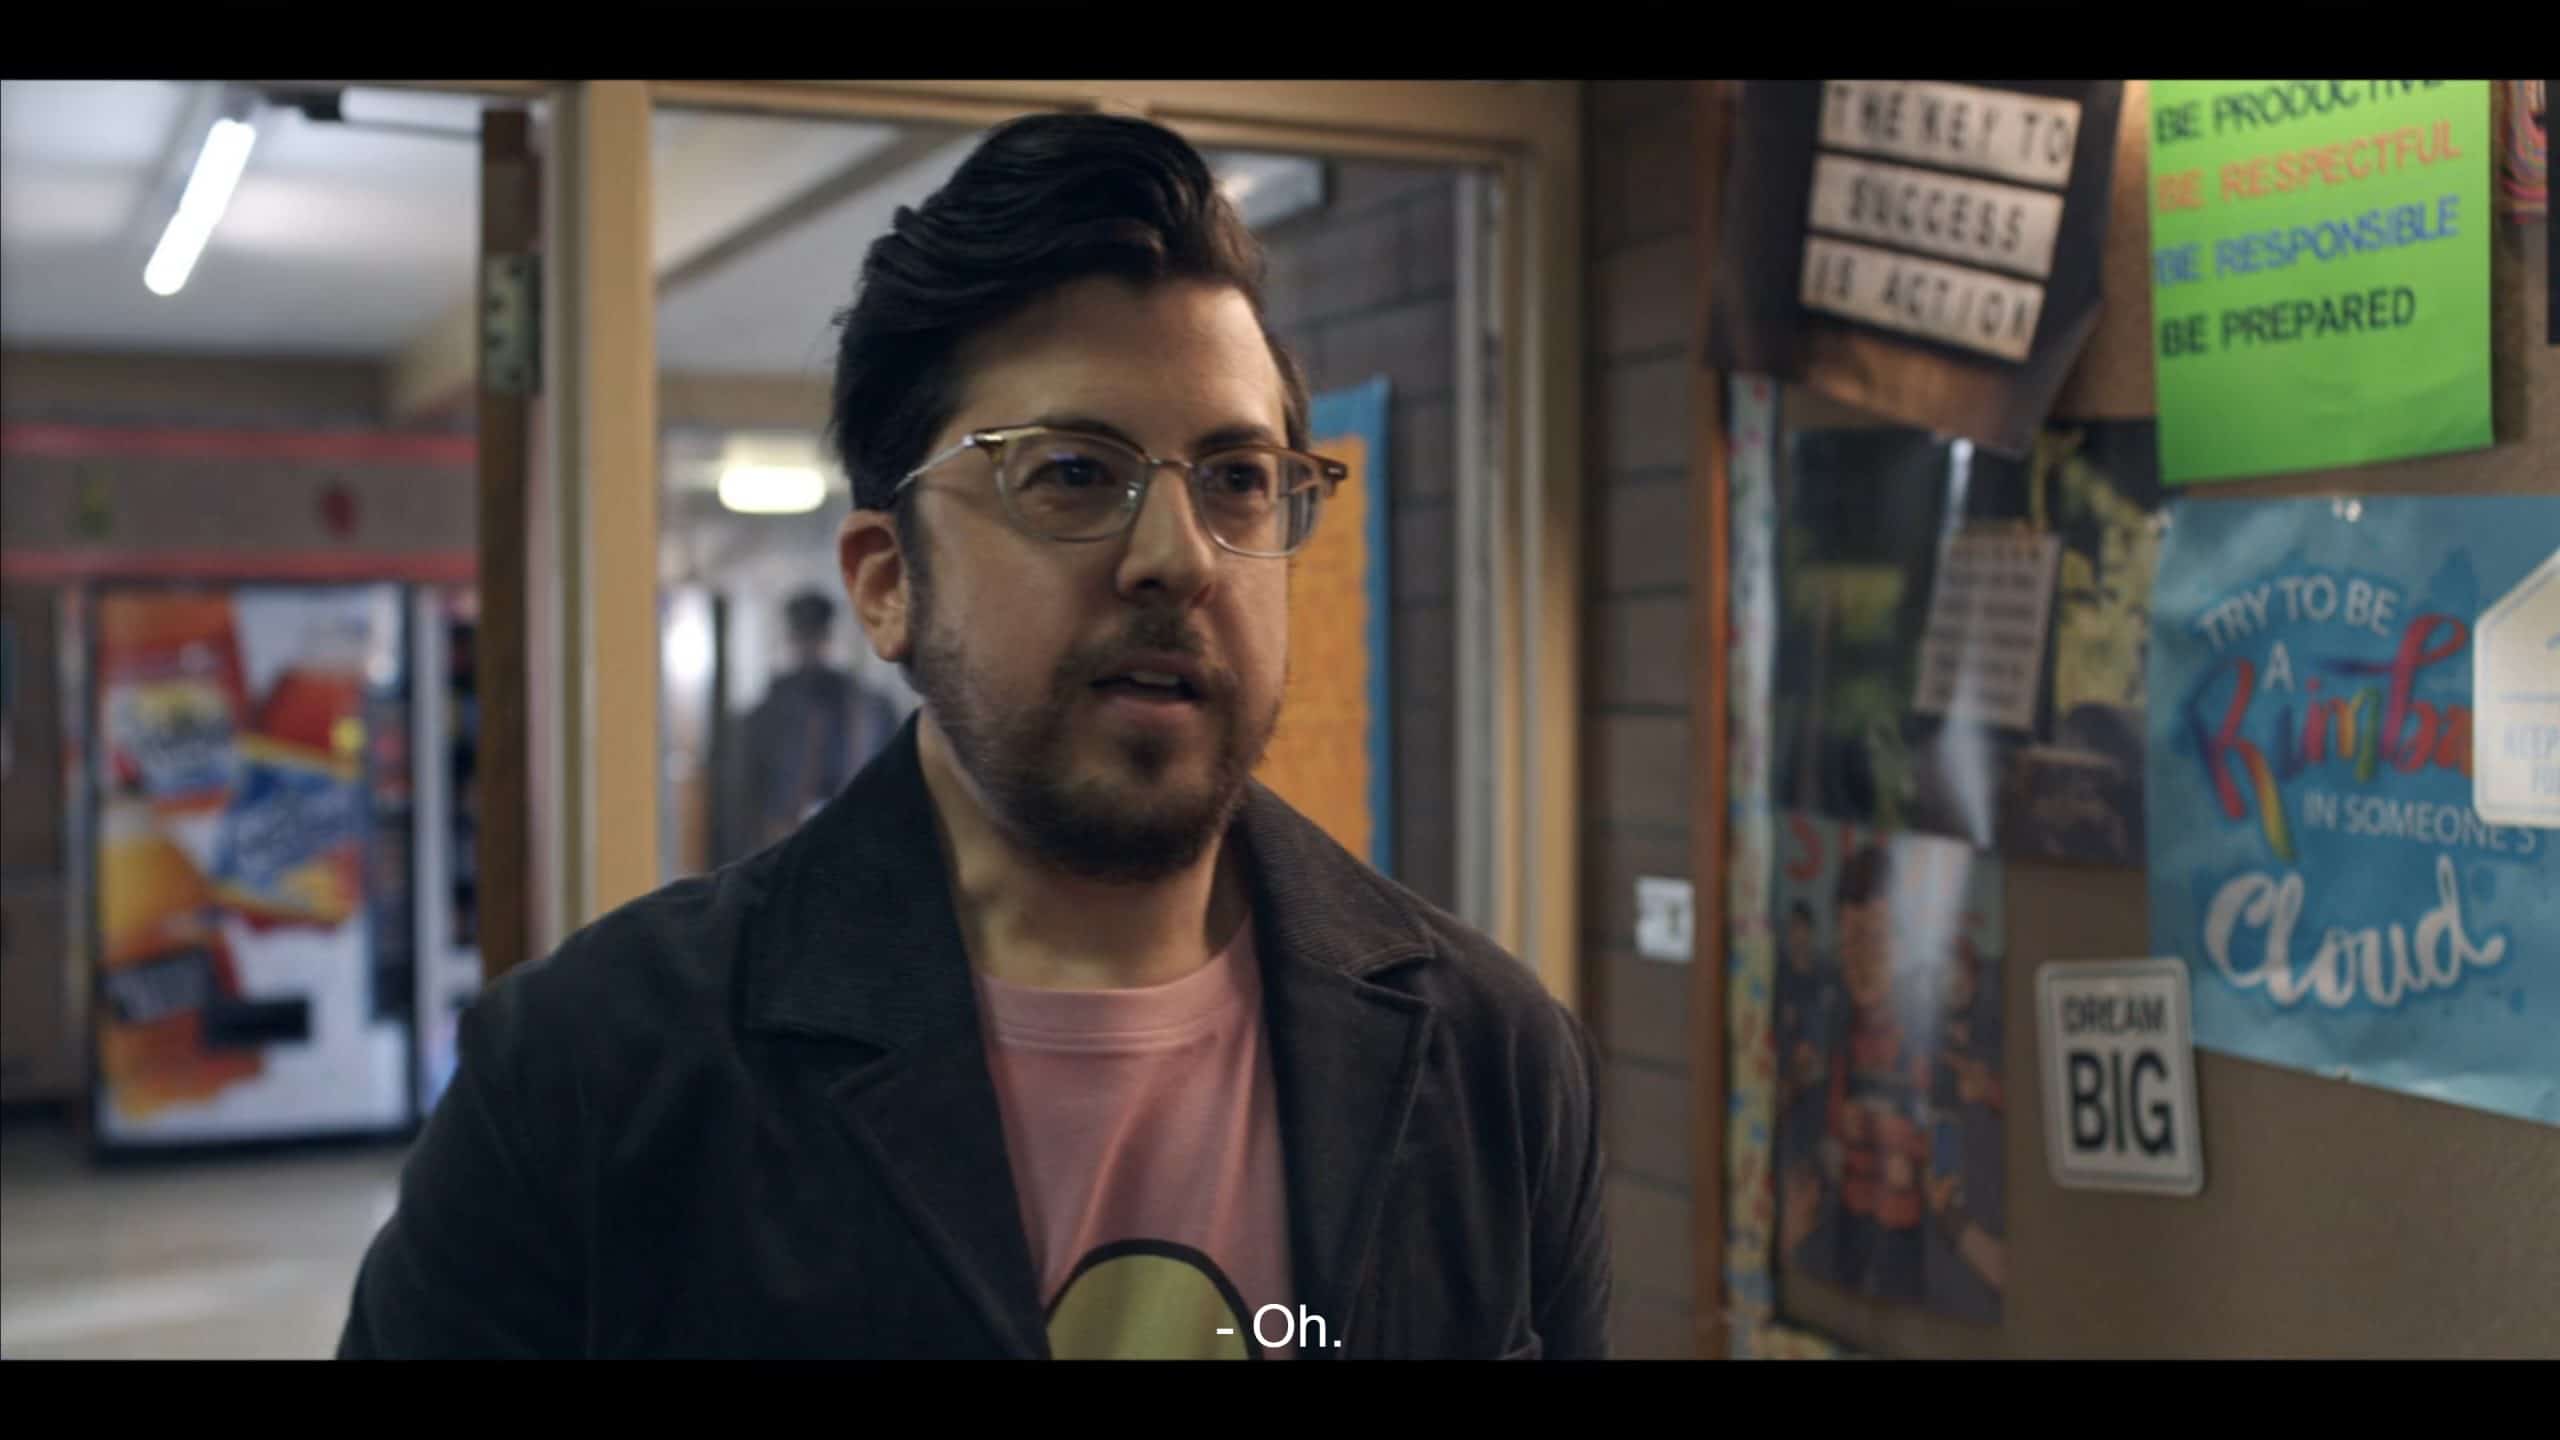 Mr. Calvin (Christopher Mintz-Plasse) trying to convince Honor and her friends to go to his show